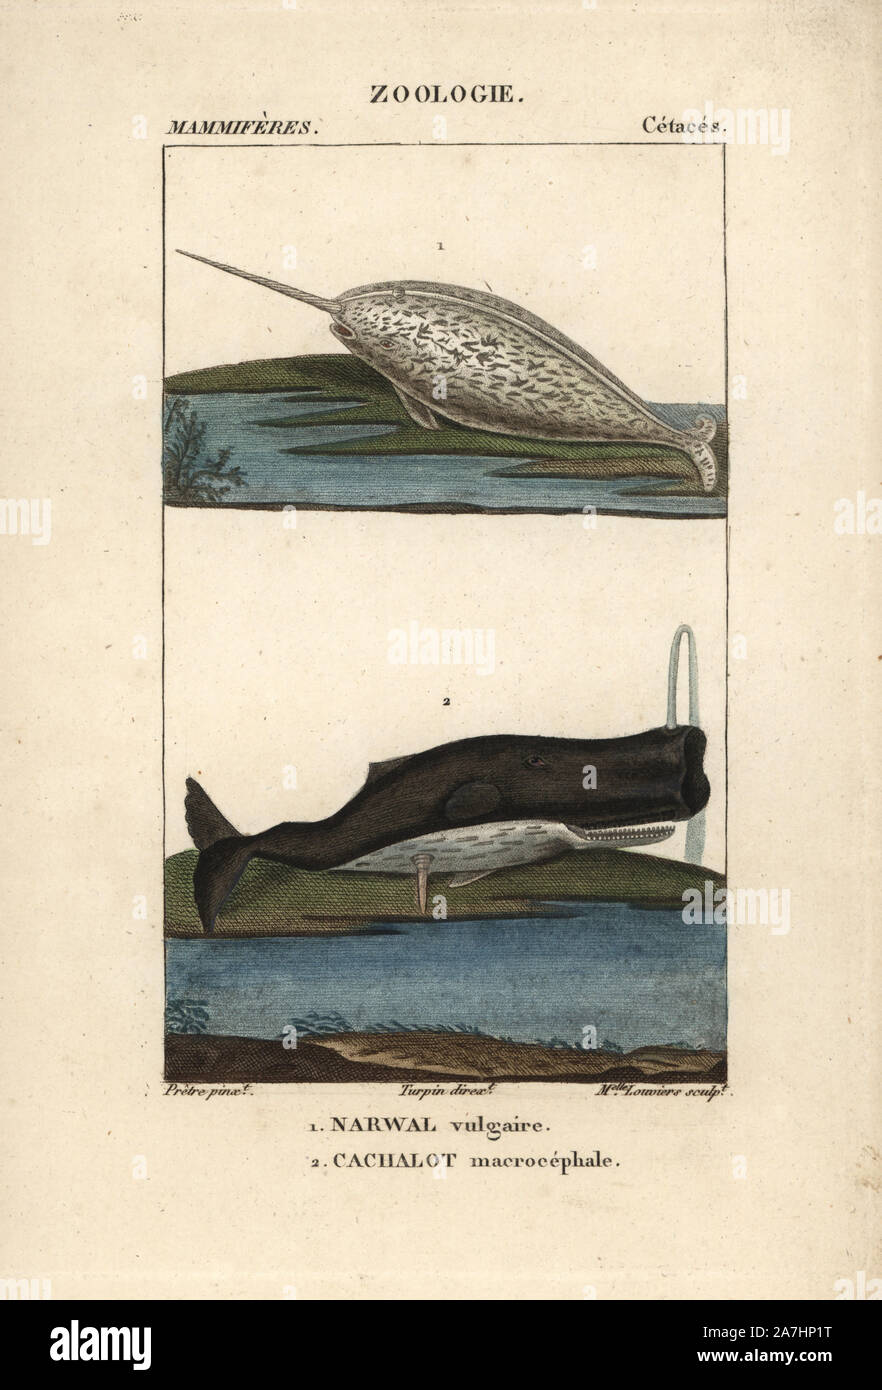 Narwhal or narwhale, Monodon monoceros, and sperm whale, Physeter macrocephalus (vulnerable). Handcoloured copperplate stipple engraving from Frederic Cuvier's 'Dictionary of Natural Science: Mammals,' Paris, France, 1816. Illustration by J. G. Pretre, engraved by Miss Louviere, directed by Pierre Jean-Francois Turpin, and published by F.G. Levrault. Jean Gabriel Pretre (17801845) was painter of natural history at Empress Josephine's zoo and later became artist to the Museum of Natural History. Turpin (1775-1840) is considered one of the greatest French botanical illustrators of the 19th cent Stock Photo